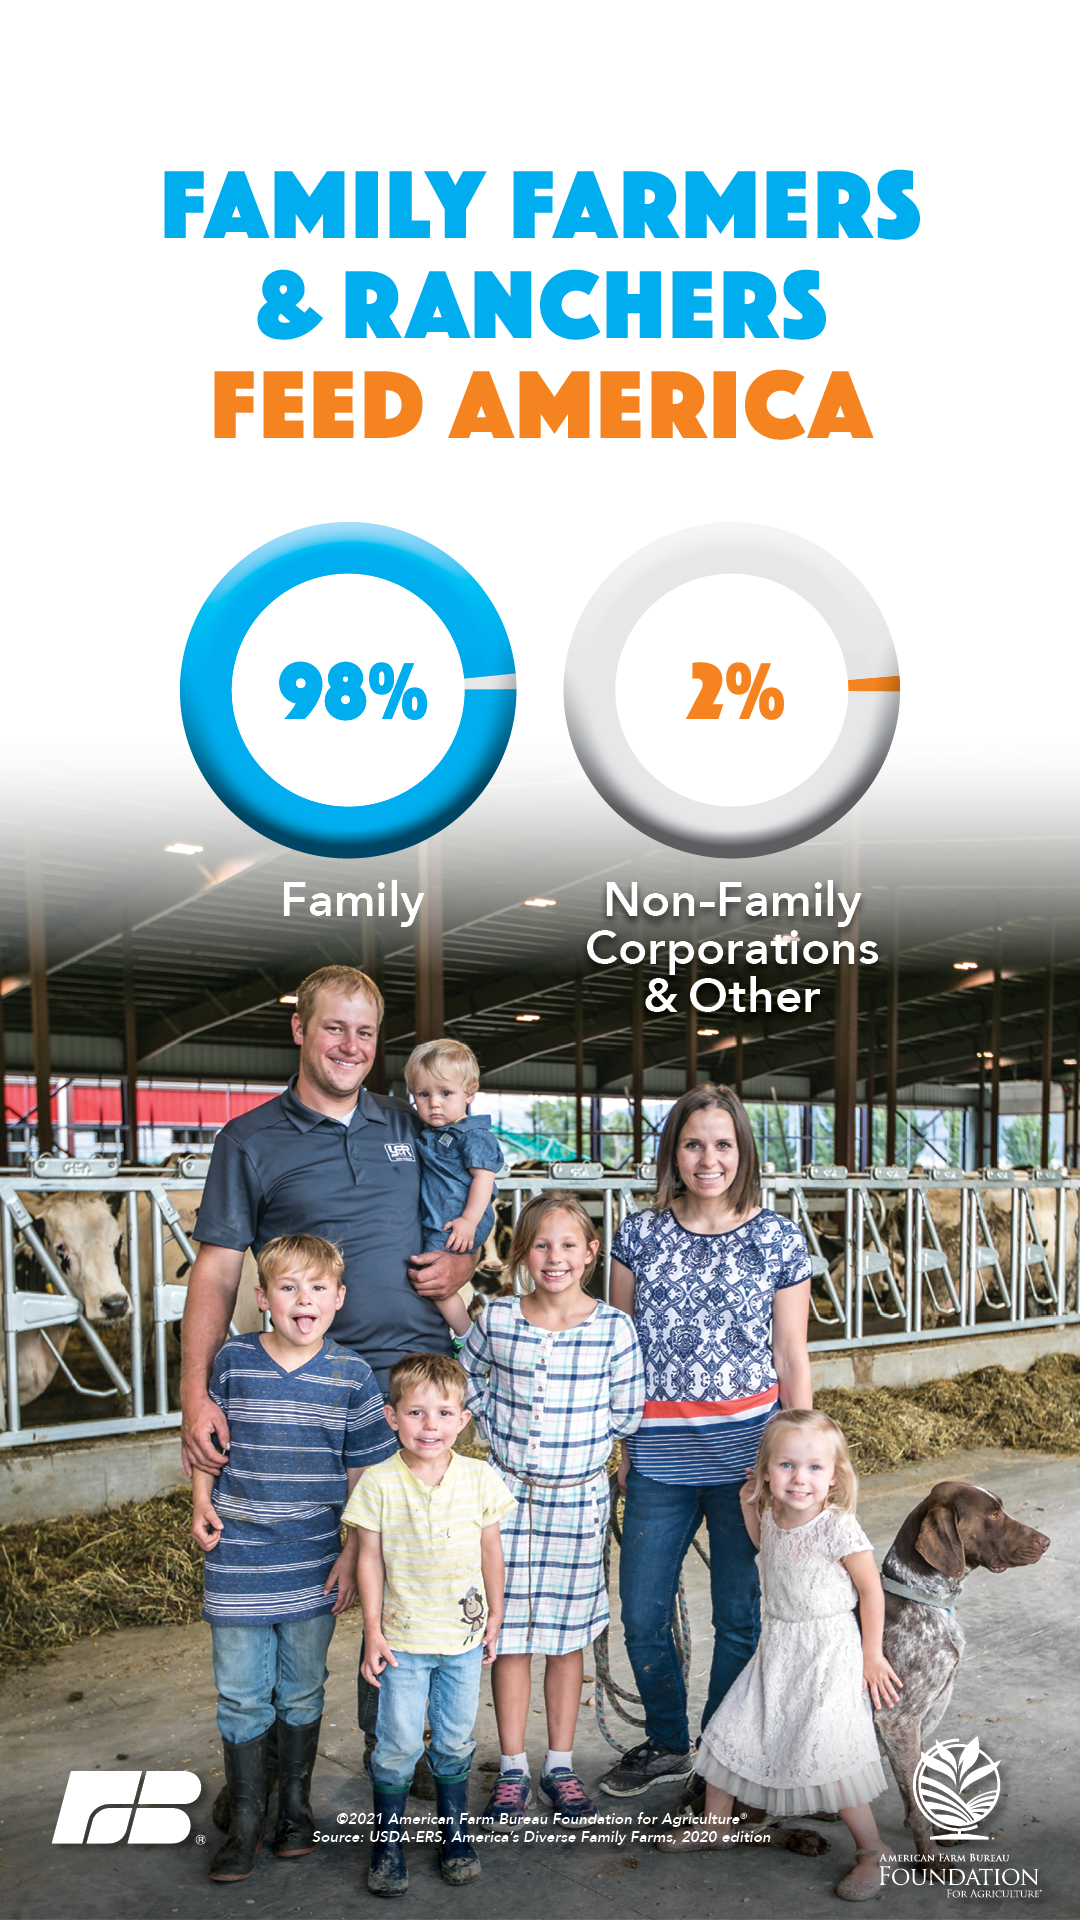 Family farms, not corporations